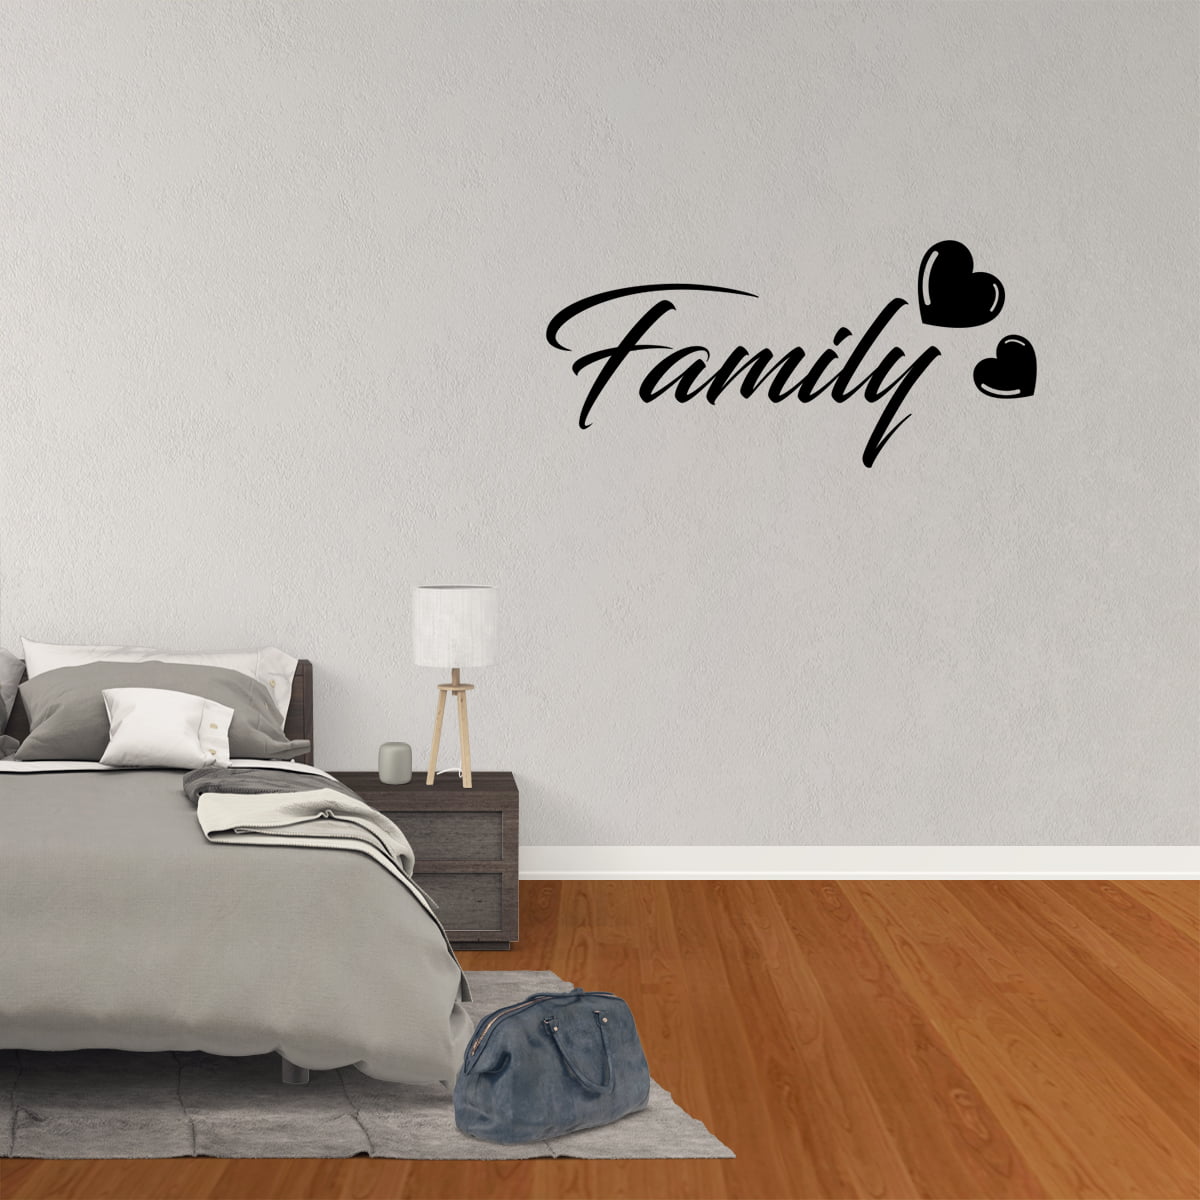 Custom Vinyl Wall Stickers quotes Lettering decals 